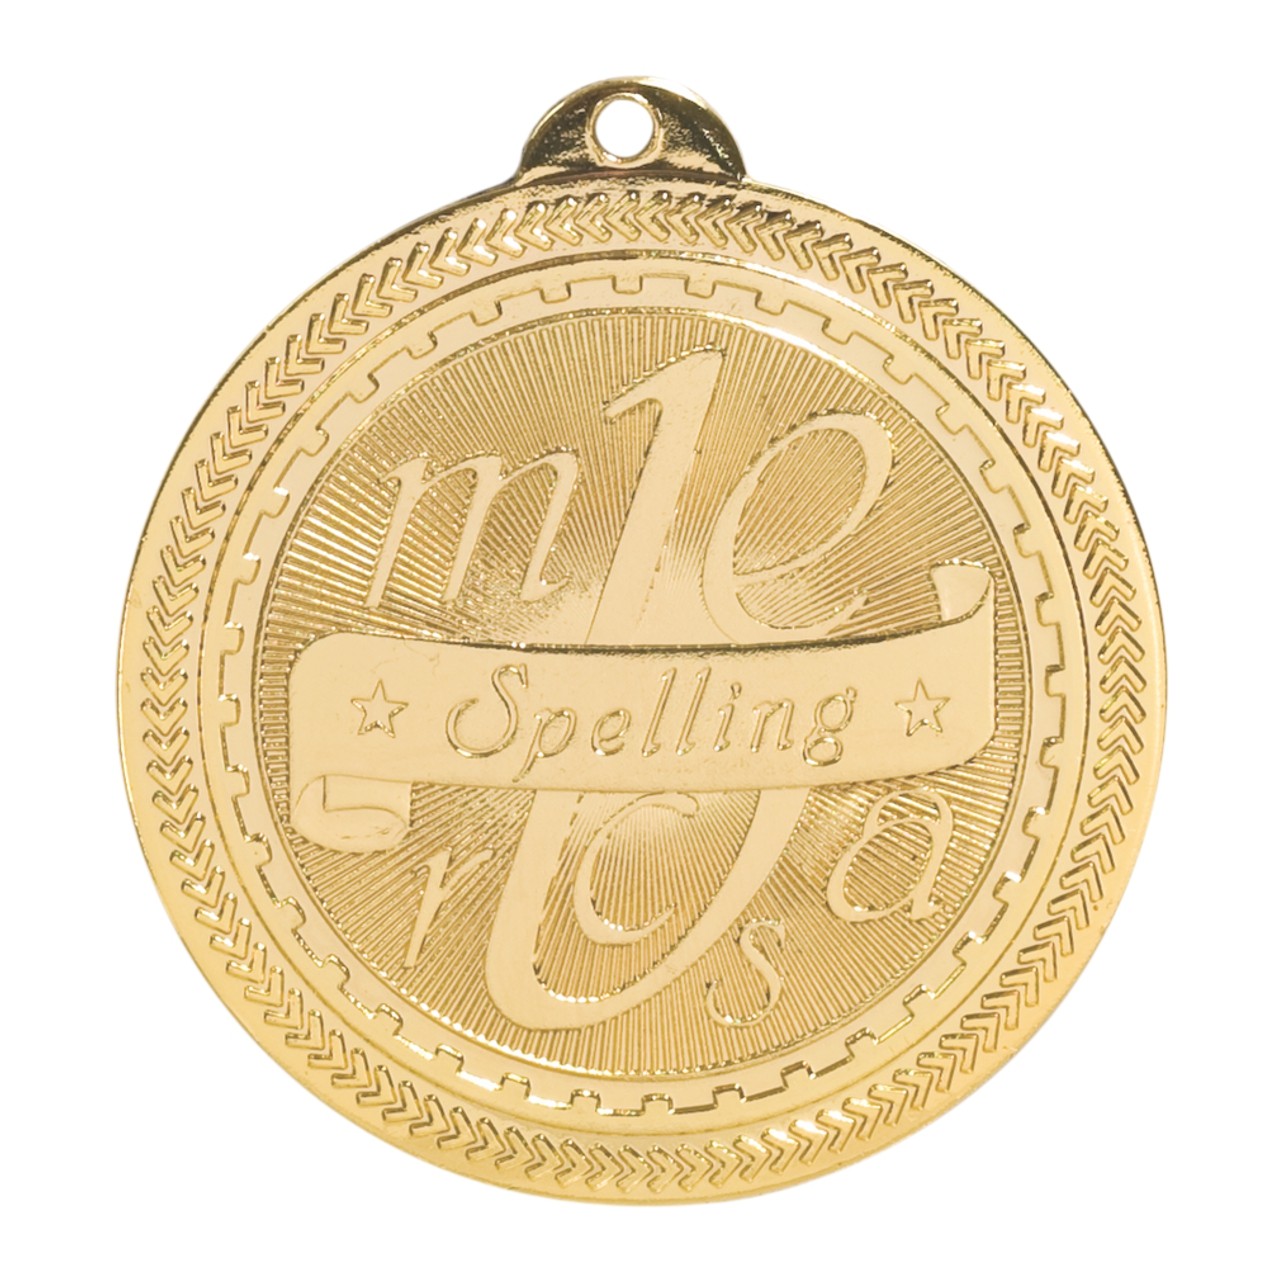 50 MM METAL SPELLING BEE MEDAL WITH RIBBON GREAT QUALITY CERTIFICATE X 15